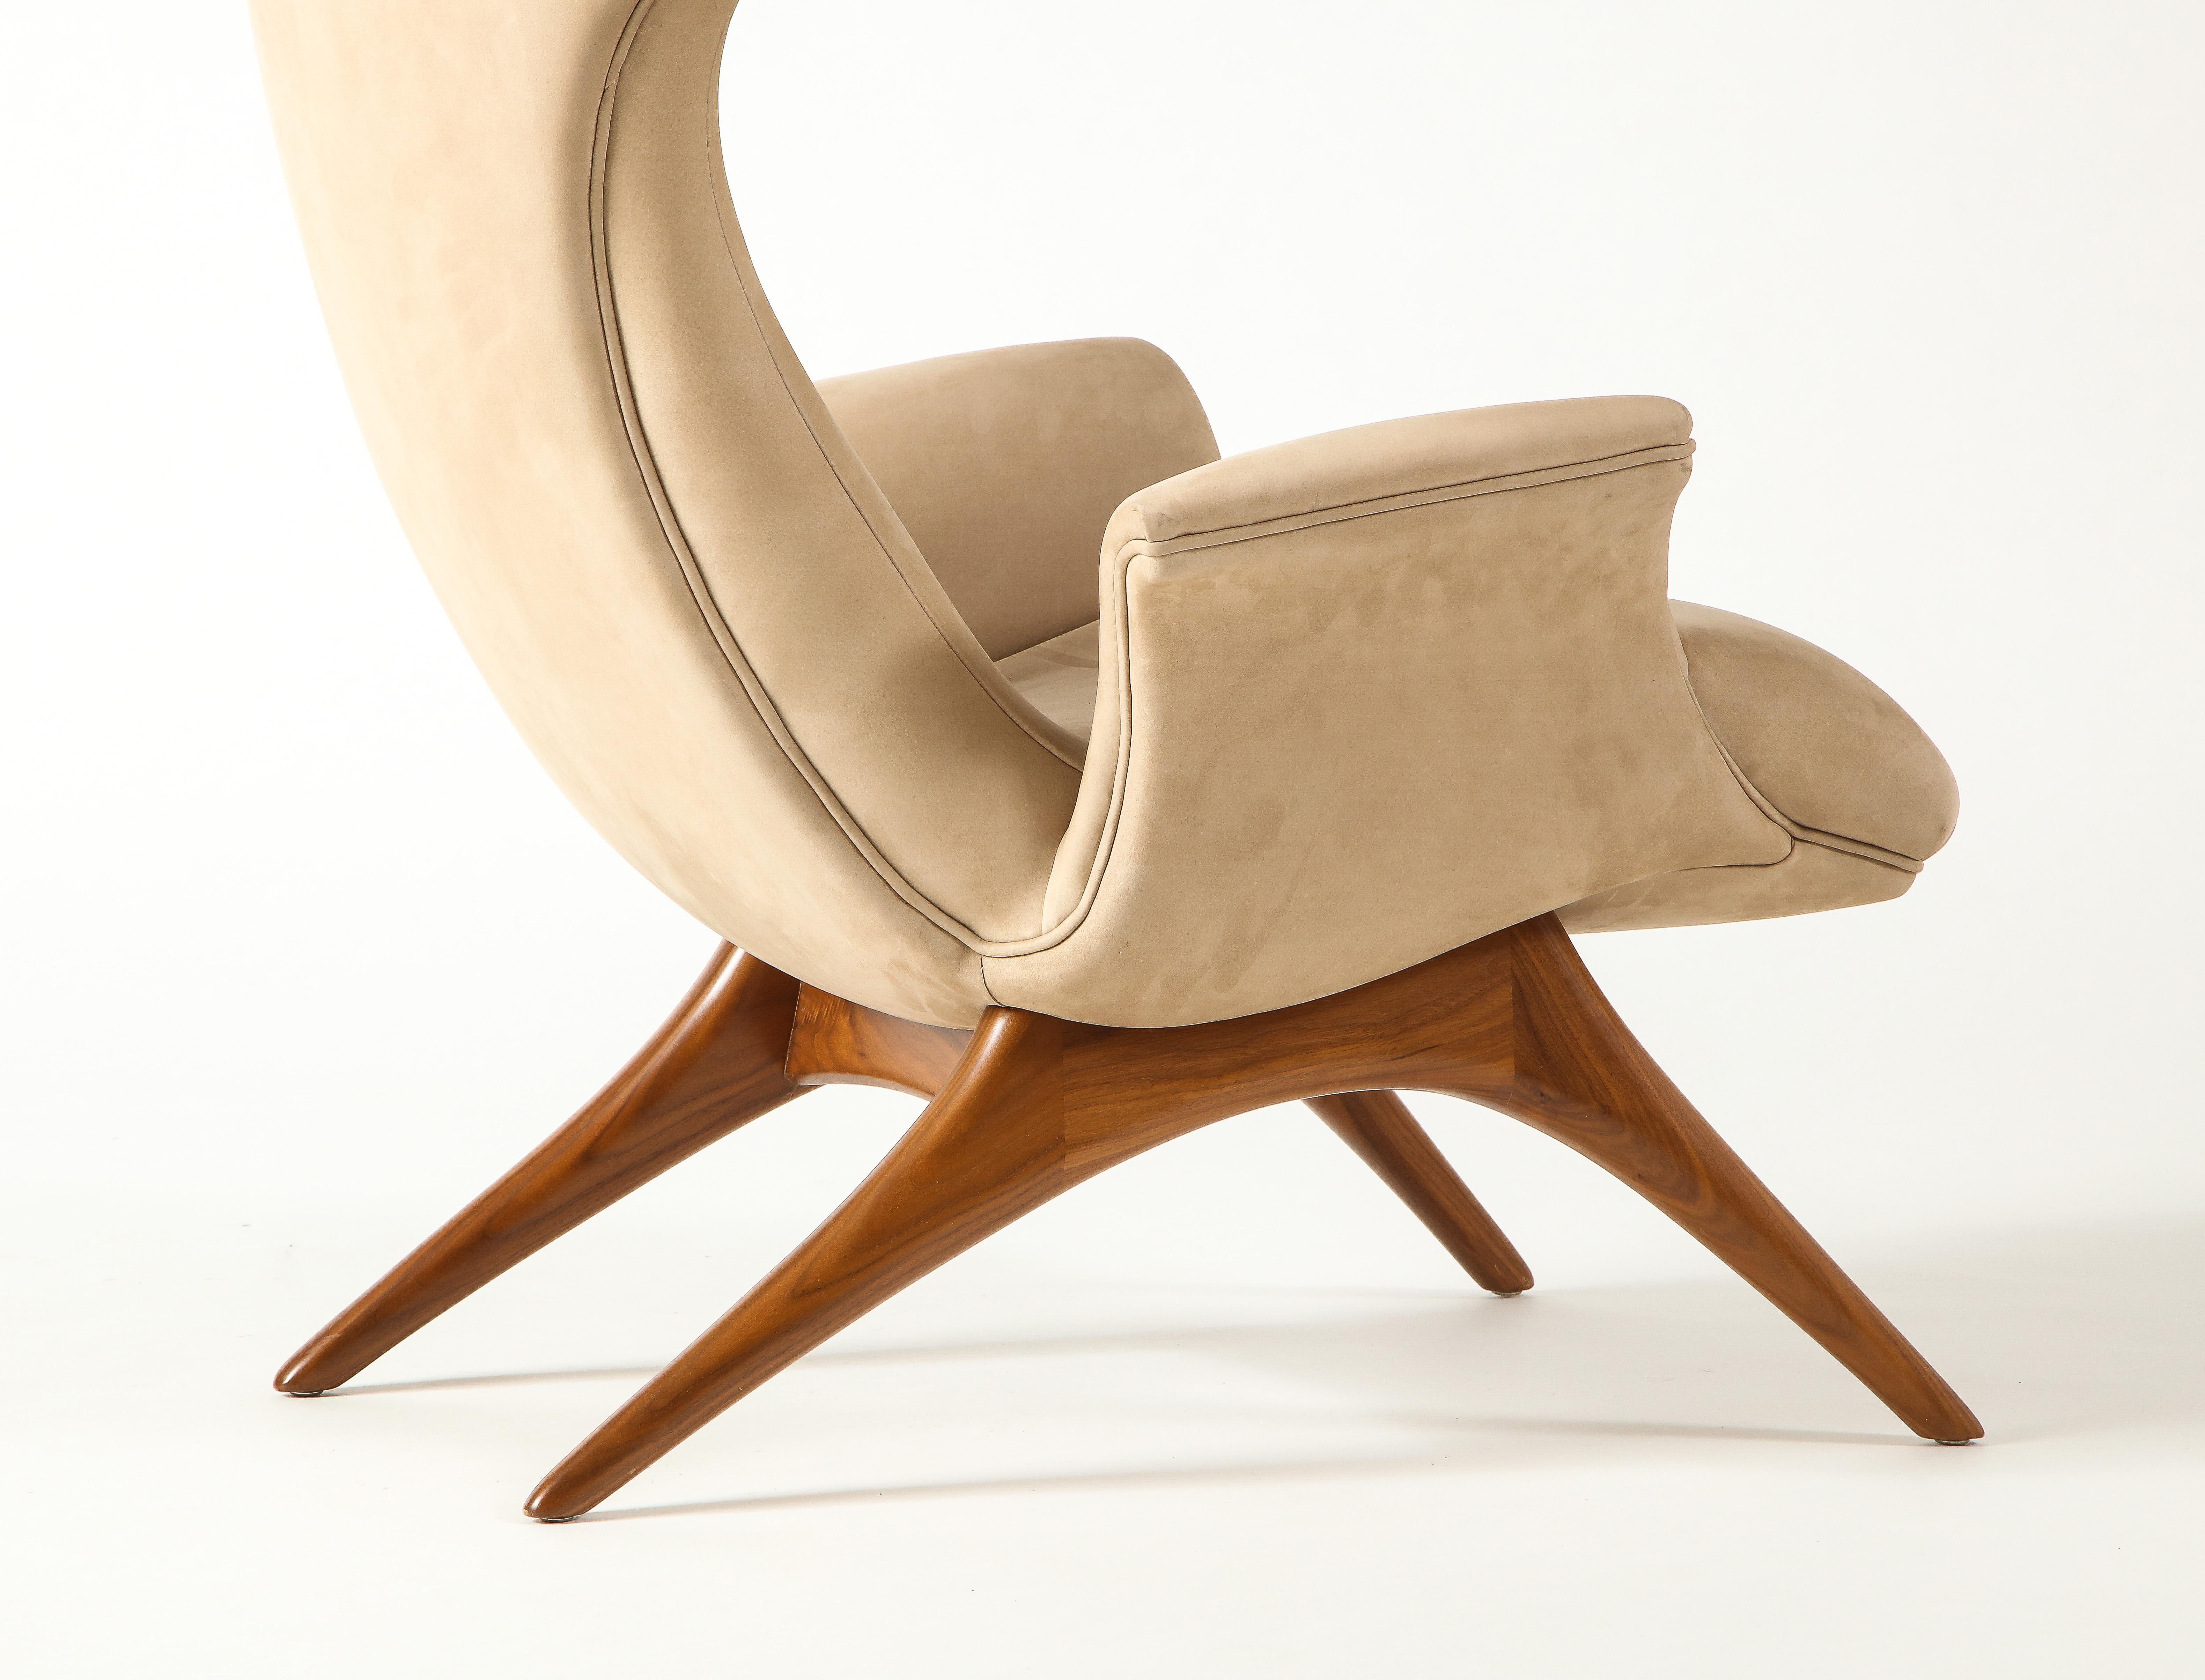 Vladimir Kagan Ondine Chair with Sueded Leather Upholstery & Natural Walnut Base 6